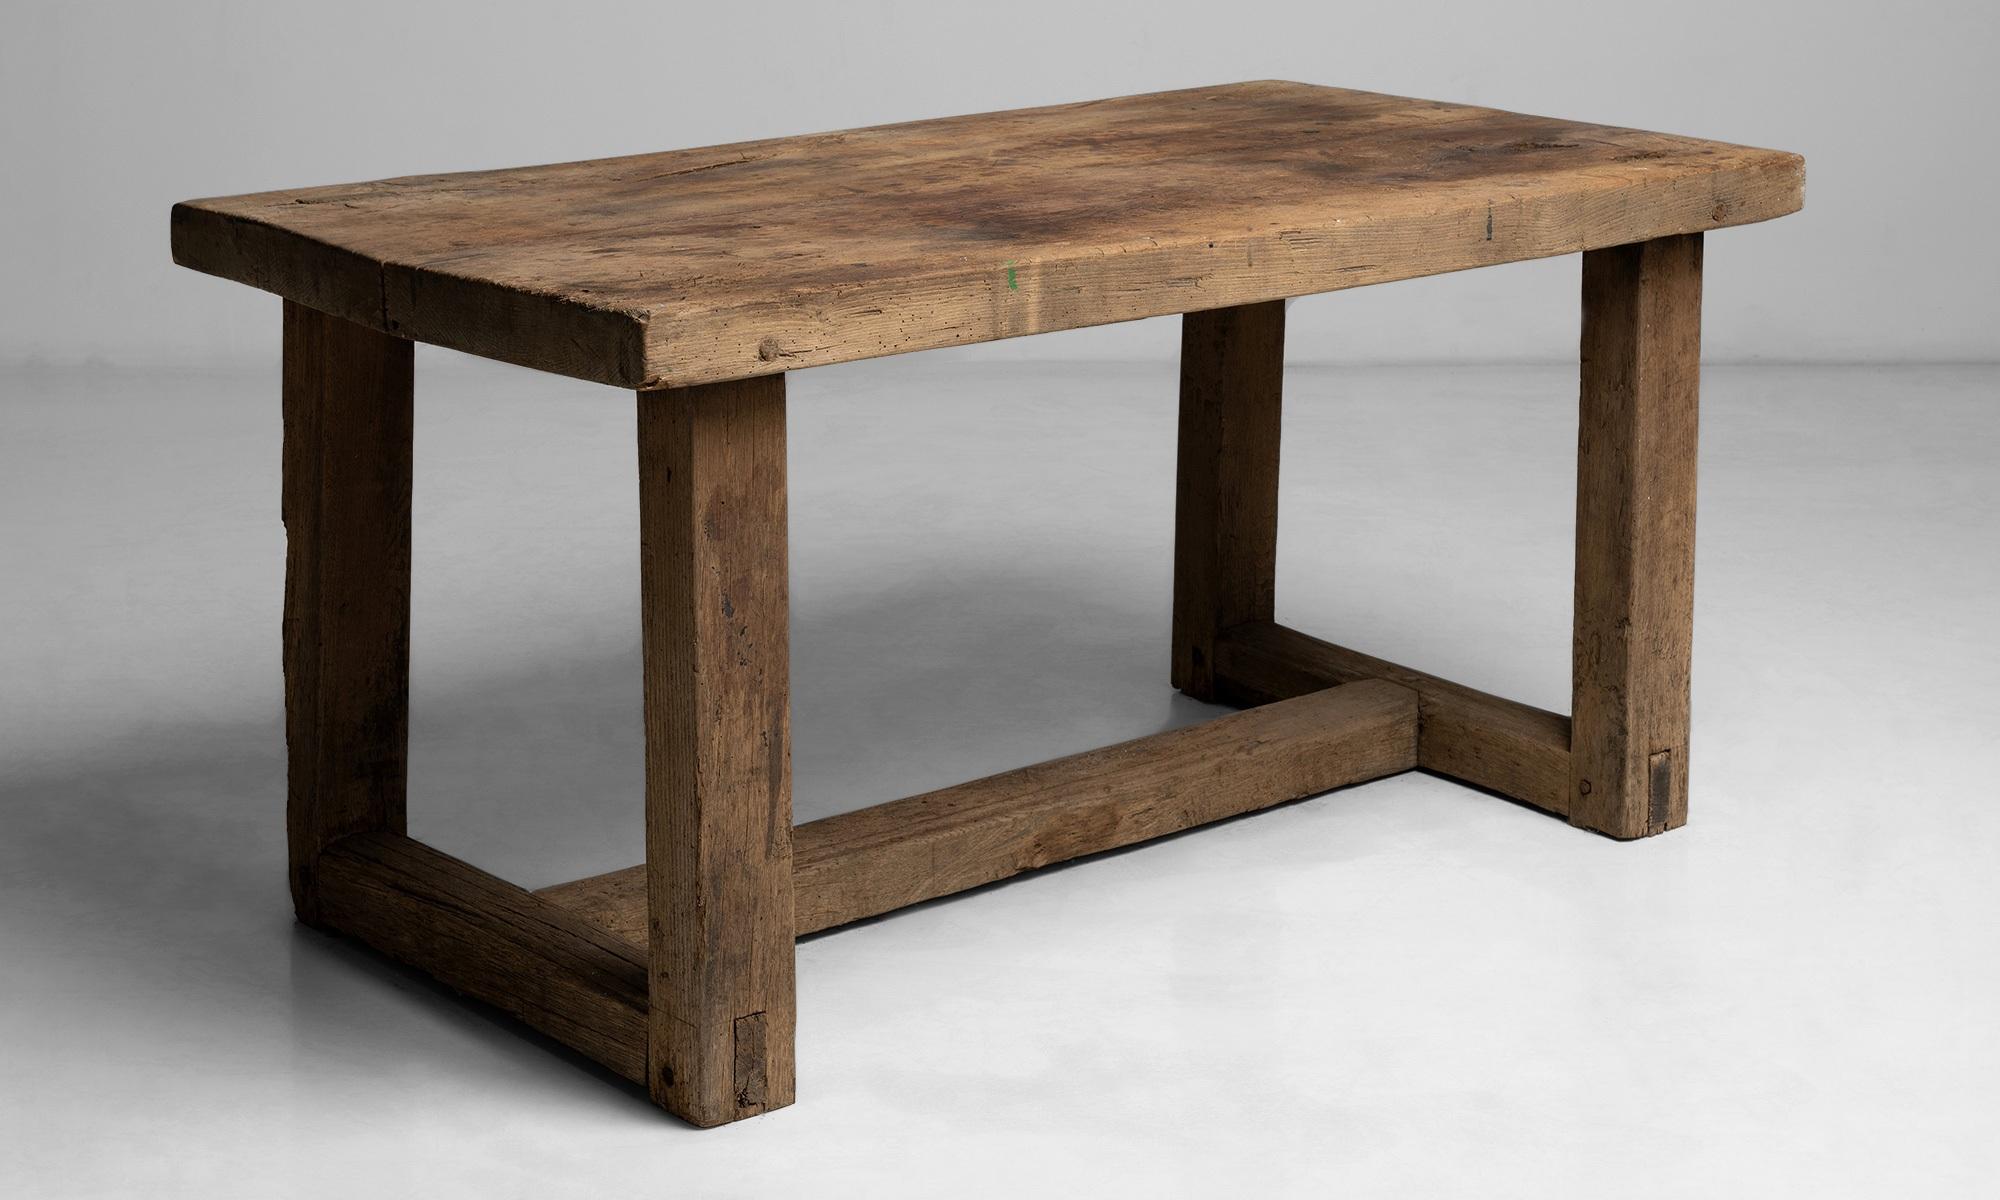 Oak Preparation table

England circa 1890

Low table constructed in oak with dry finish.

Measures: 50.5” L x 28” D x 24.75” H.
  